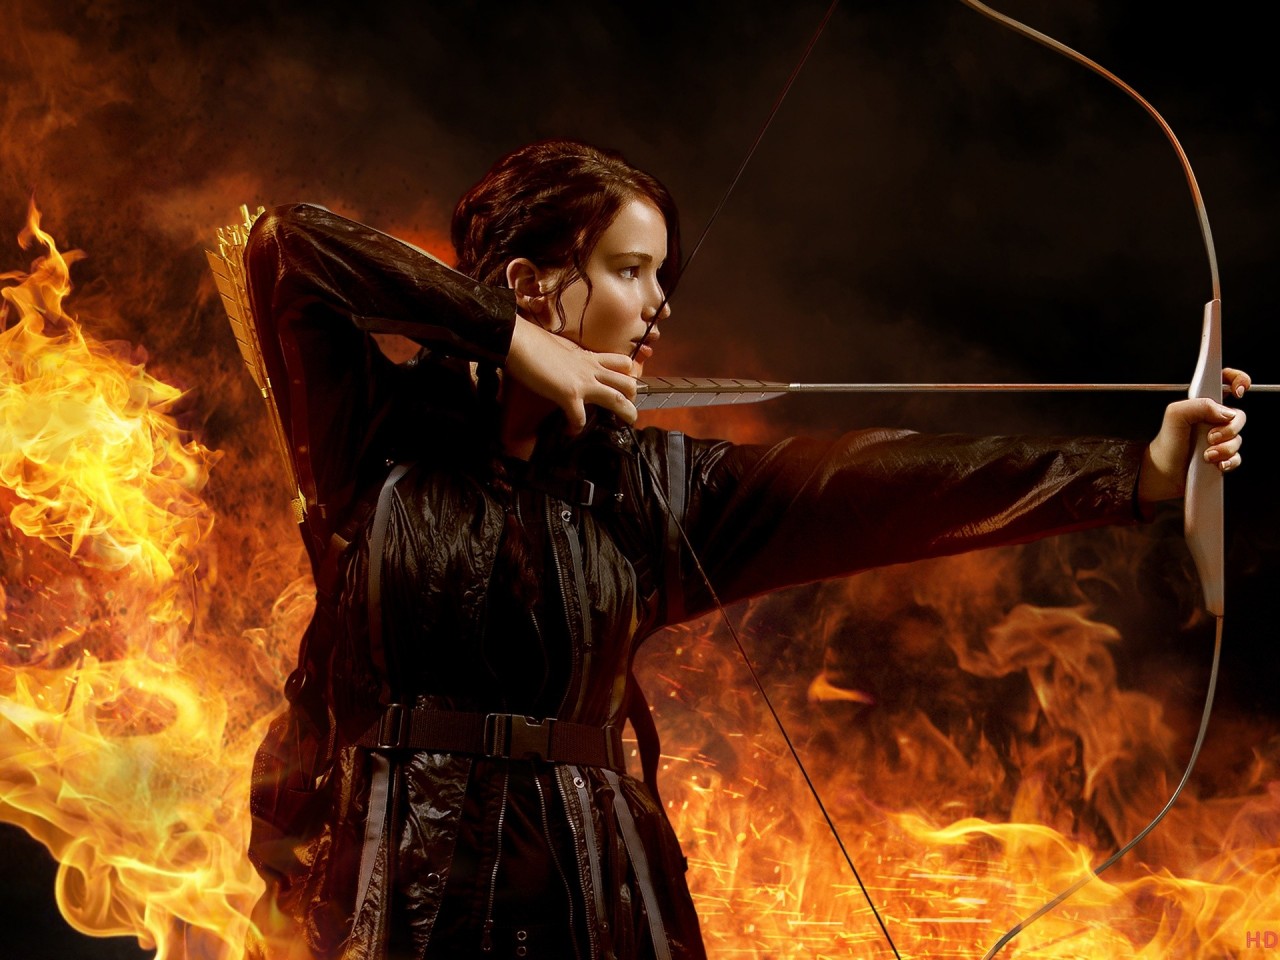 Hunger games bow and arrow